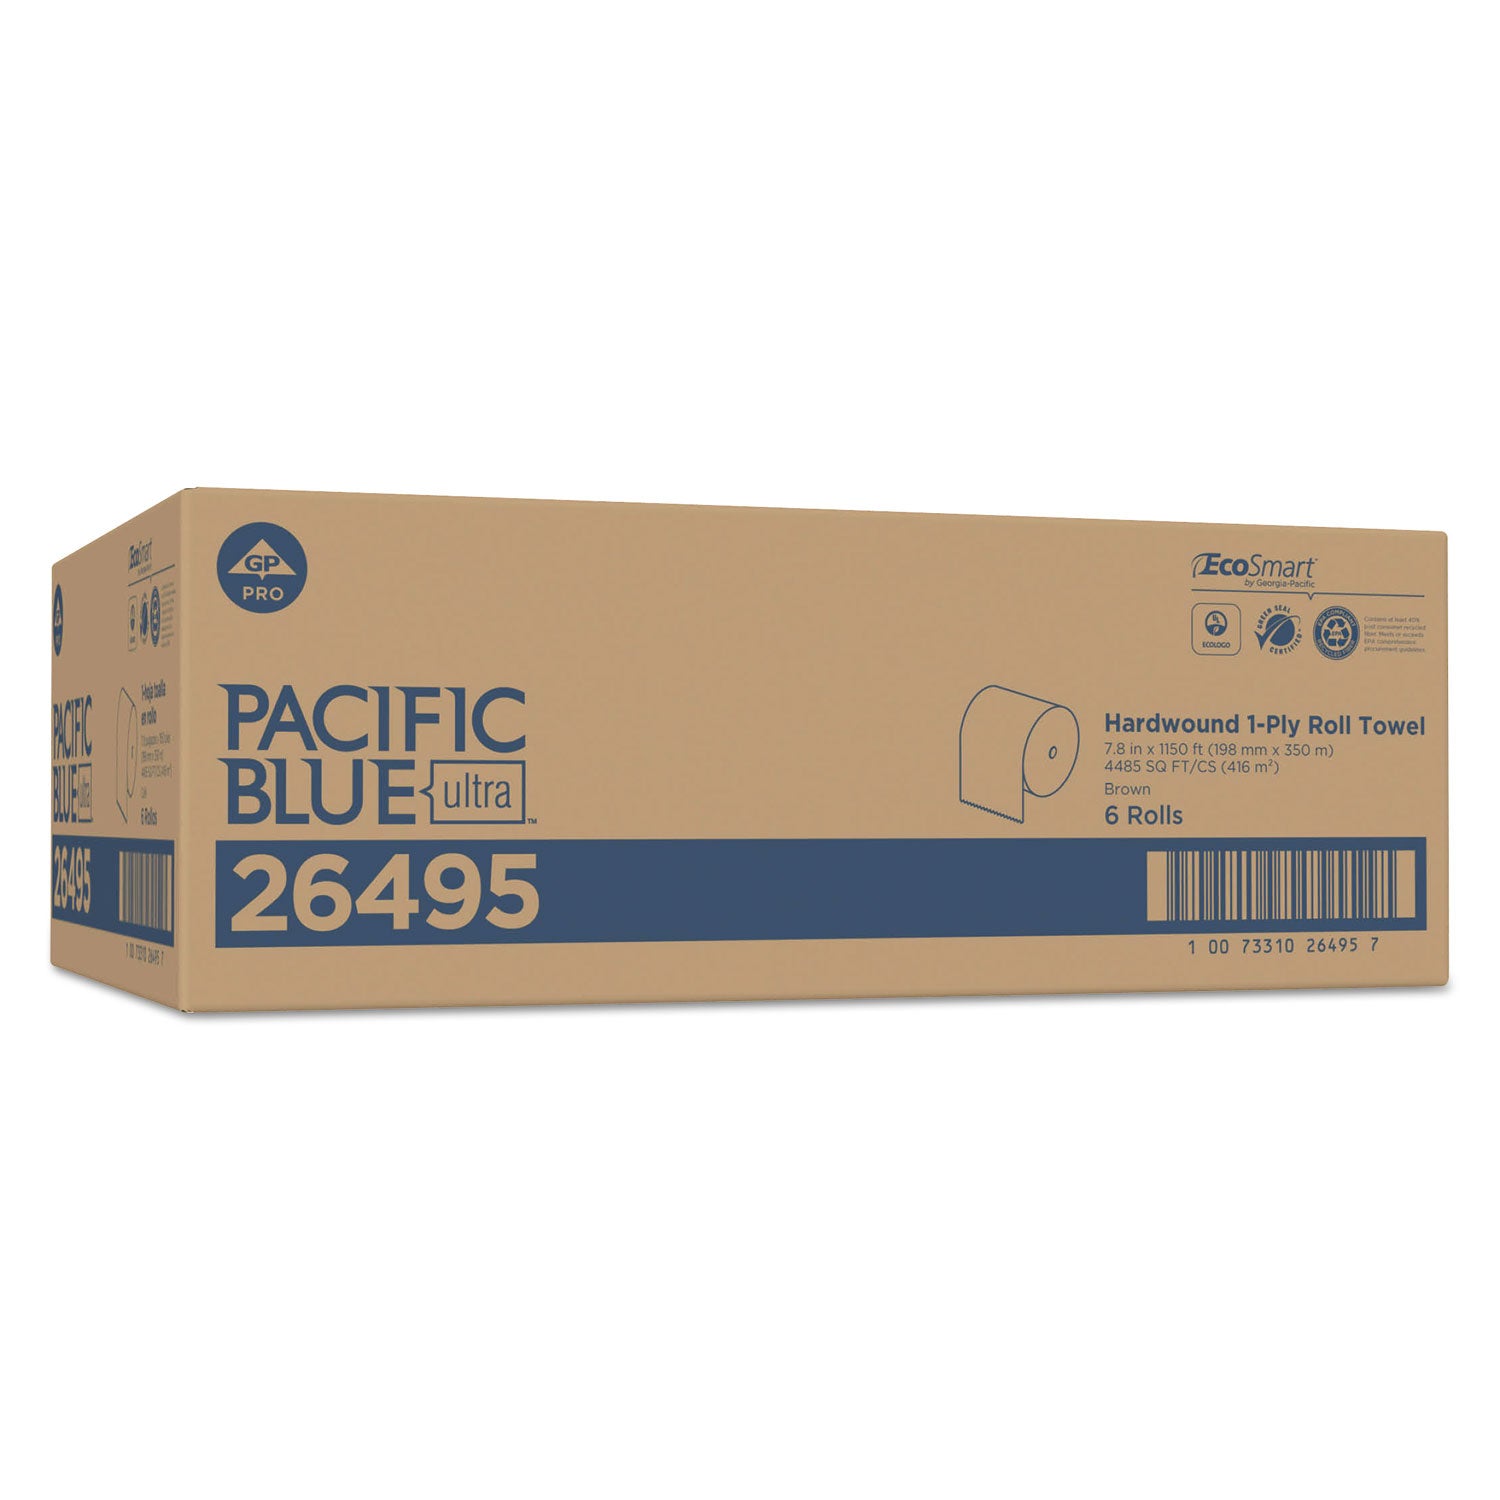 pacific-blue-ultra-paper-towels-1-ply-787-x-1150-ft-natural-6-rolls-carton_gpc26495 - 3